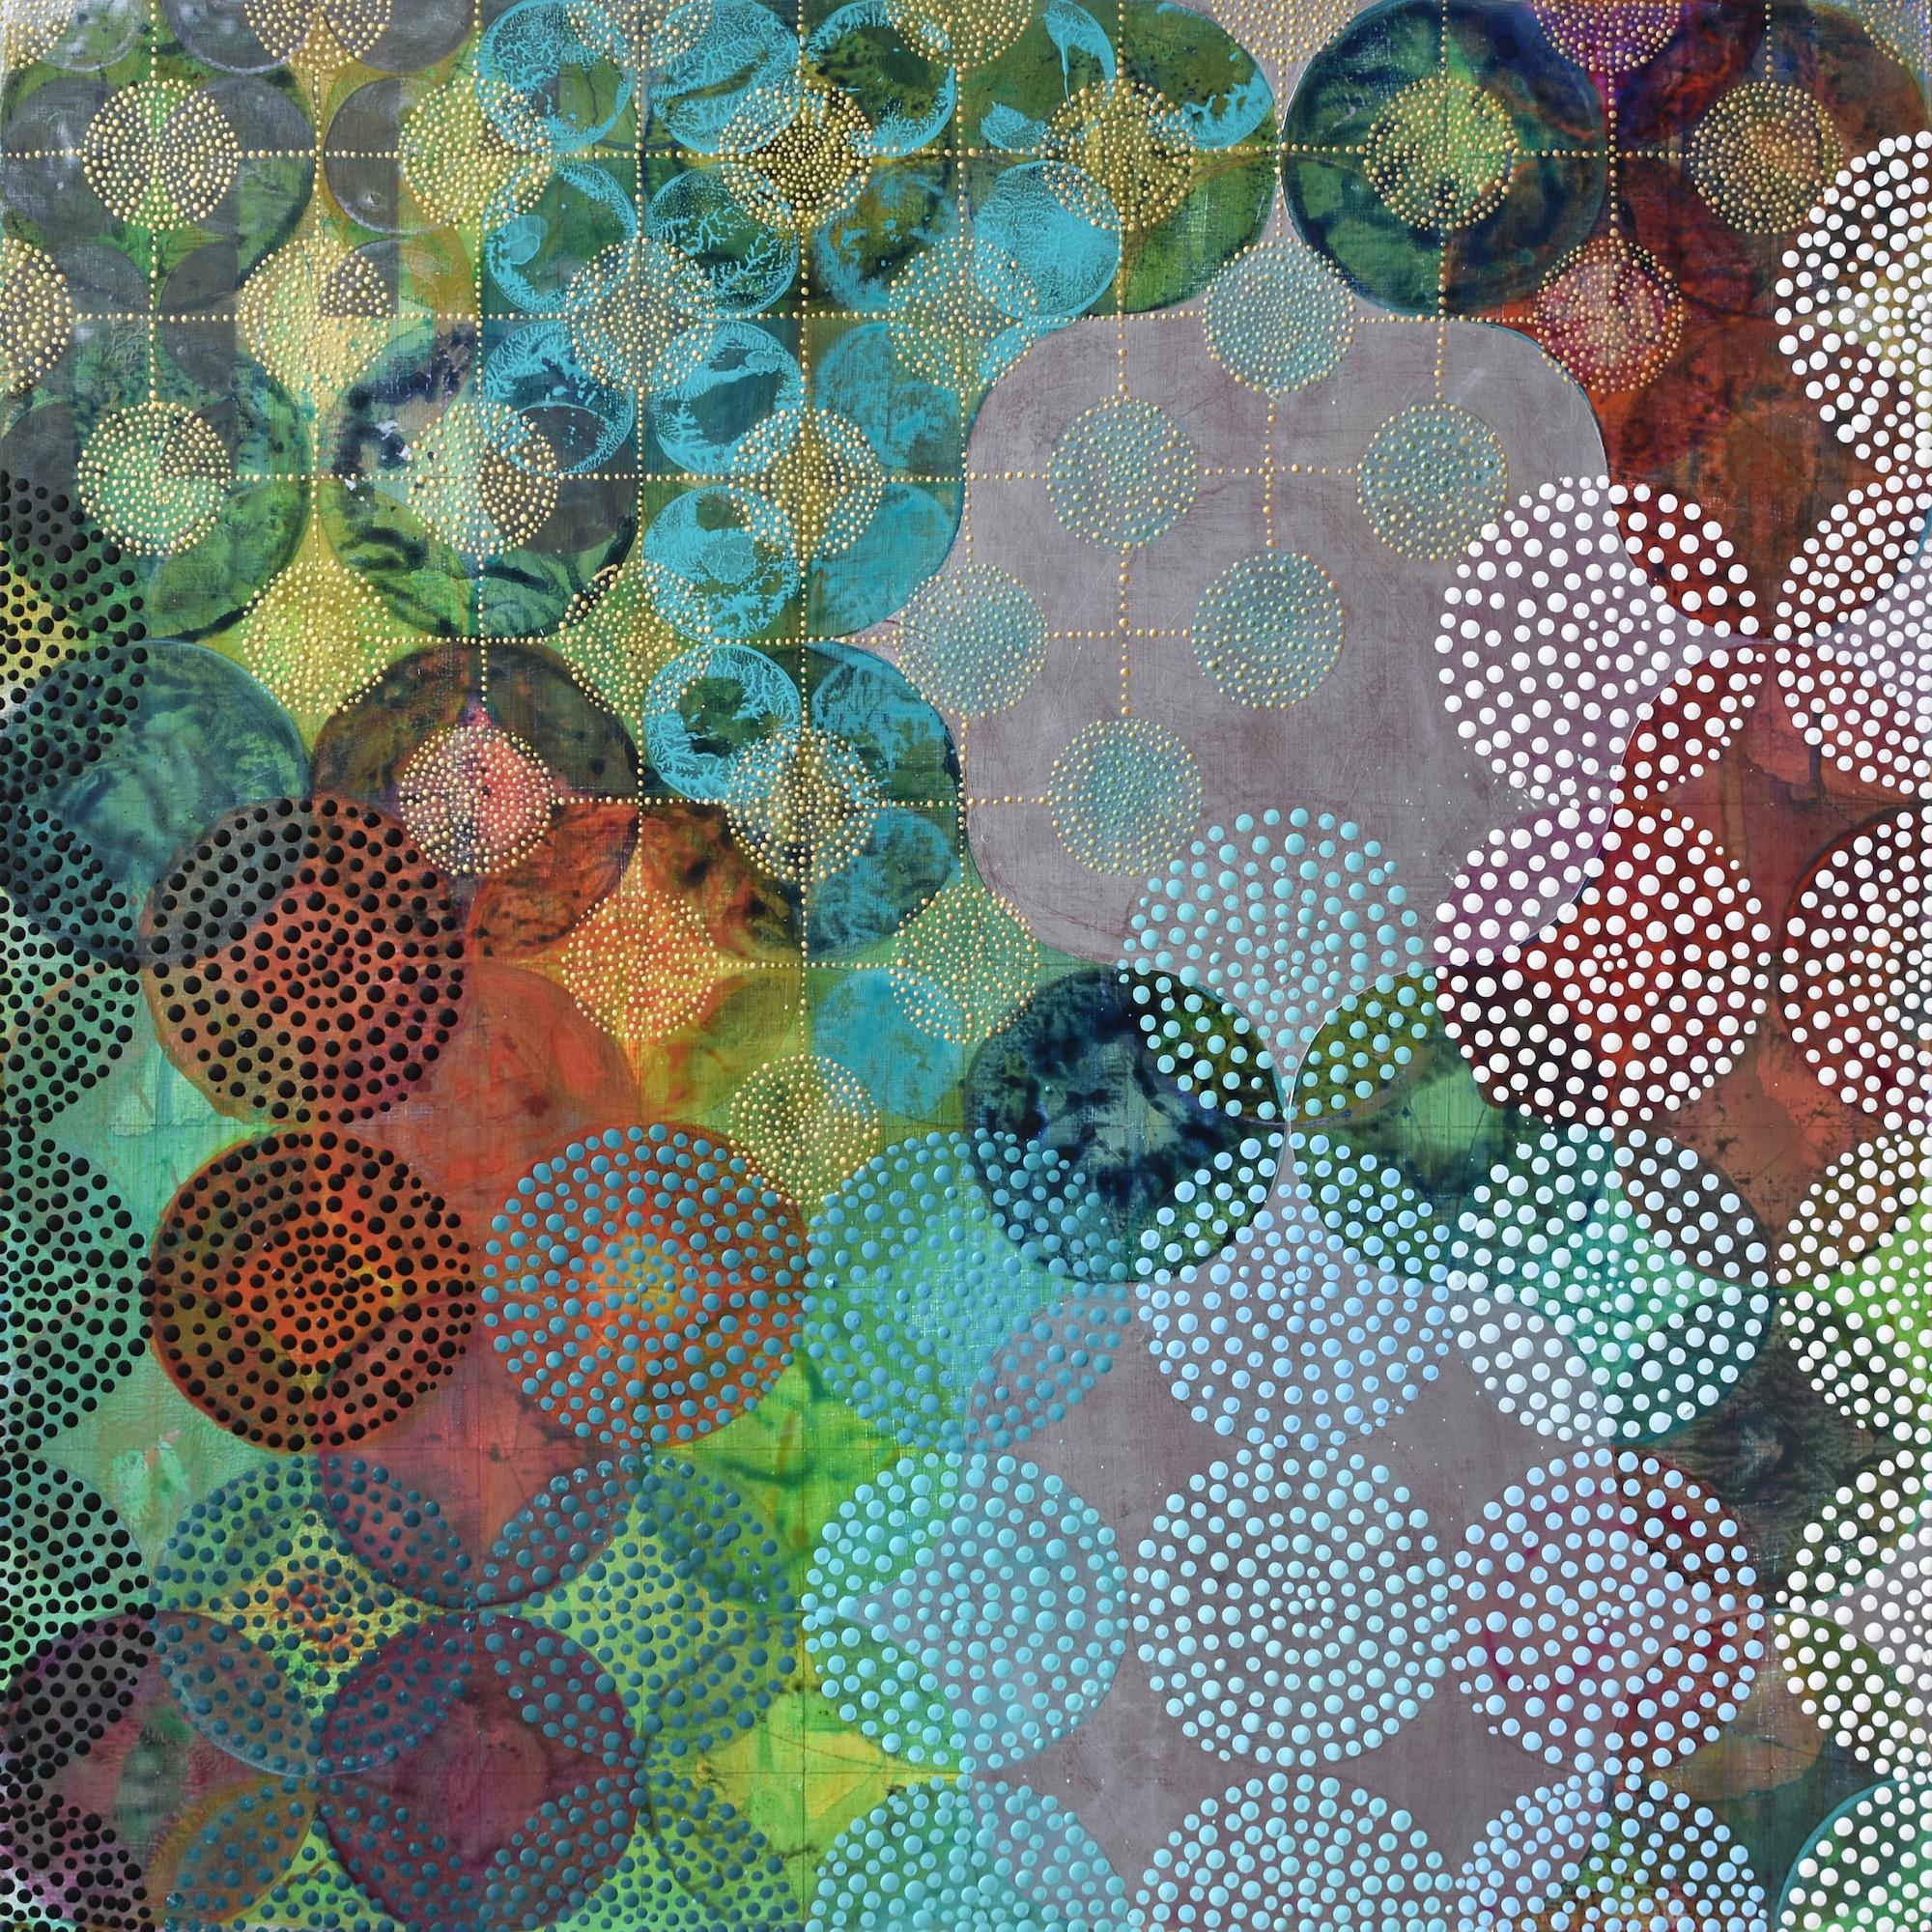 "Circles 35", abstract, geometric, turquoise, green, orange, acrylic painting - Painting by Denise Driscoll